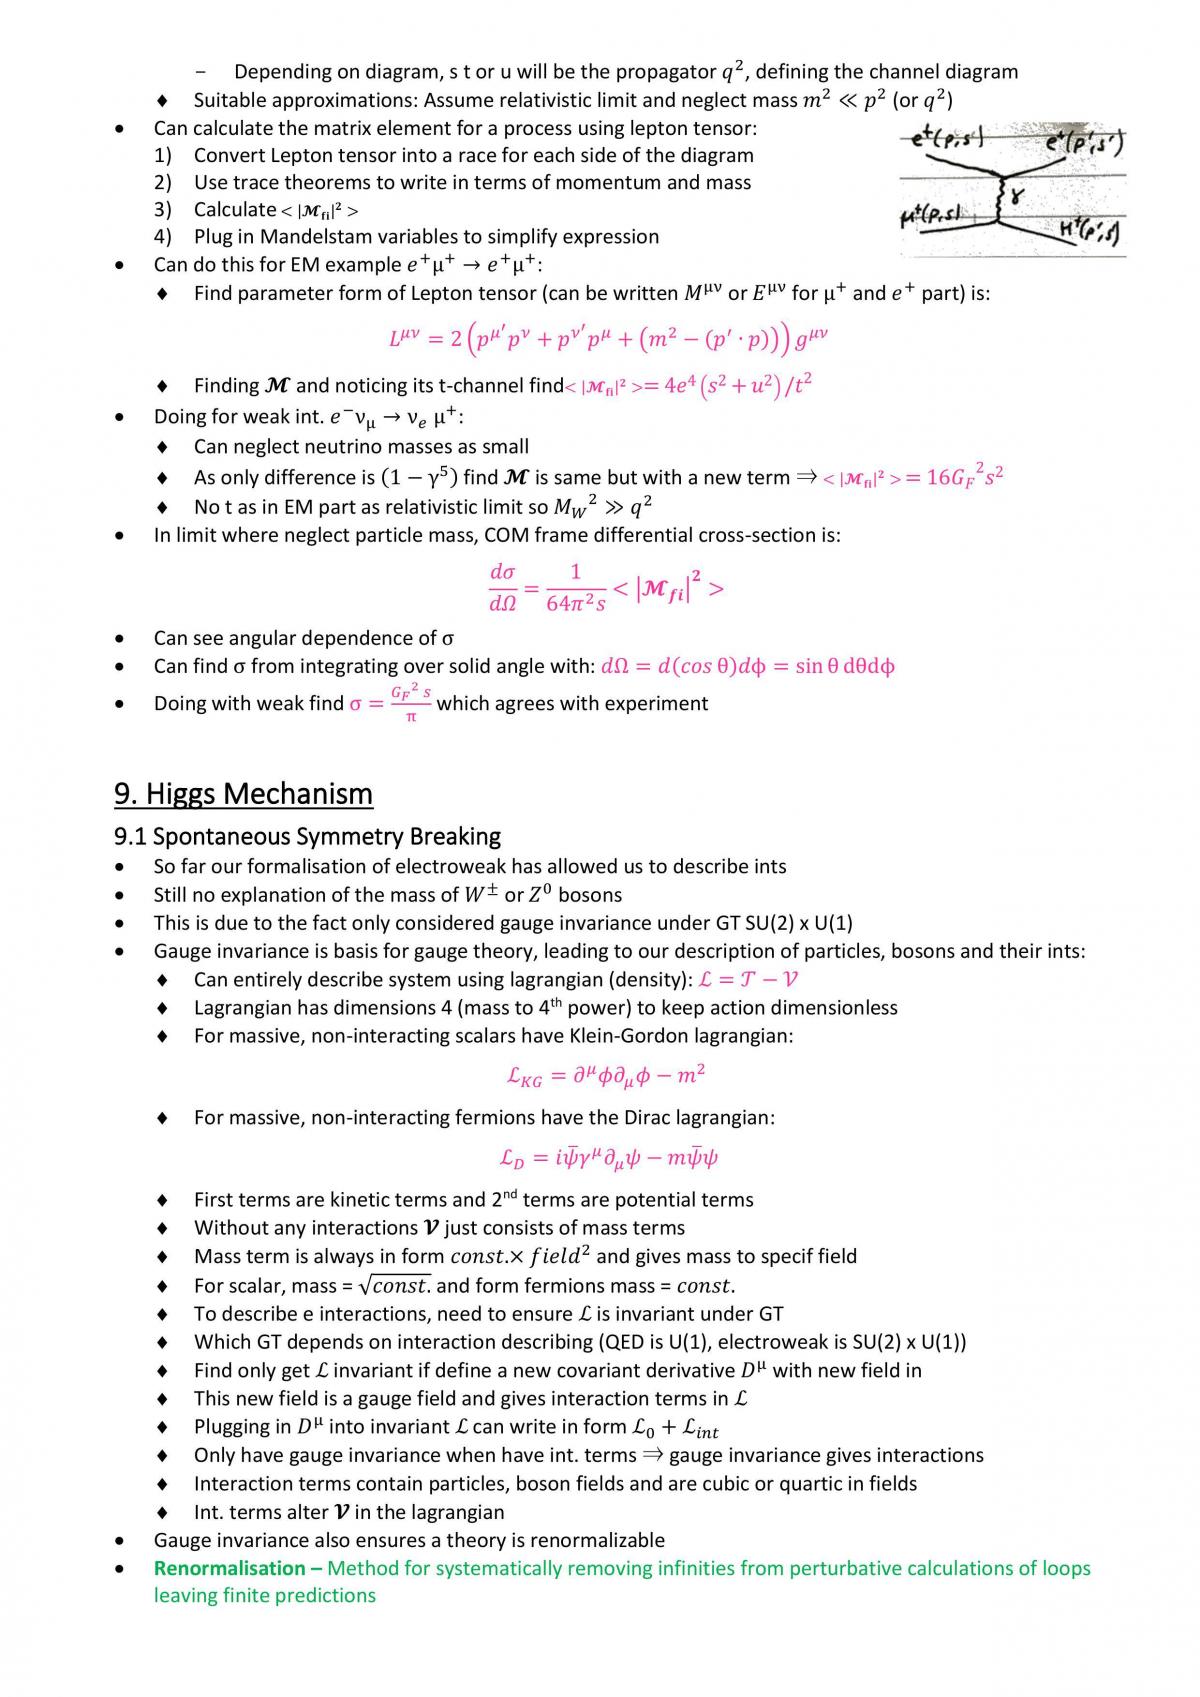 Advanced Particle Physics Complete Notes - Page 23